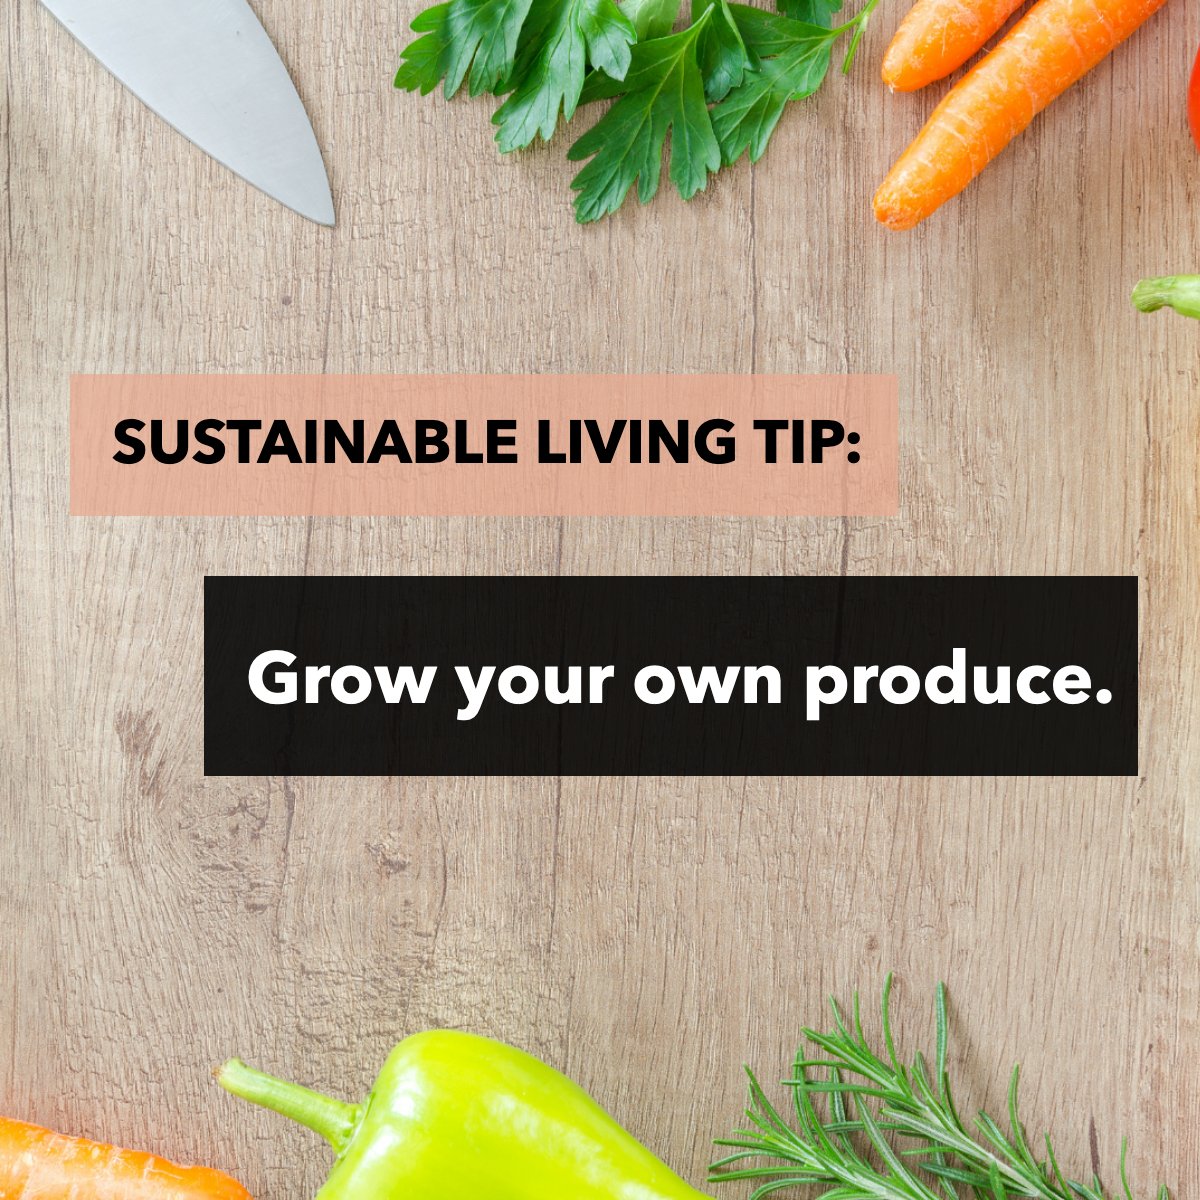 Do you cultivate some of your vegetables or food 🍅?  This is not only healthier but extremely sustainable! 

#sustainablelifestyle #sustainable #sustainablity #sustainablefood 
 #arodteam #teamarod #veteranrealtor #scvrealestate #usmc #semperfidlis #usmcveteran